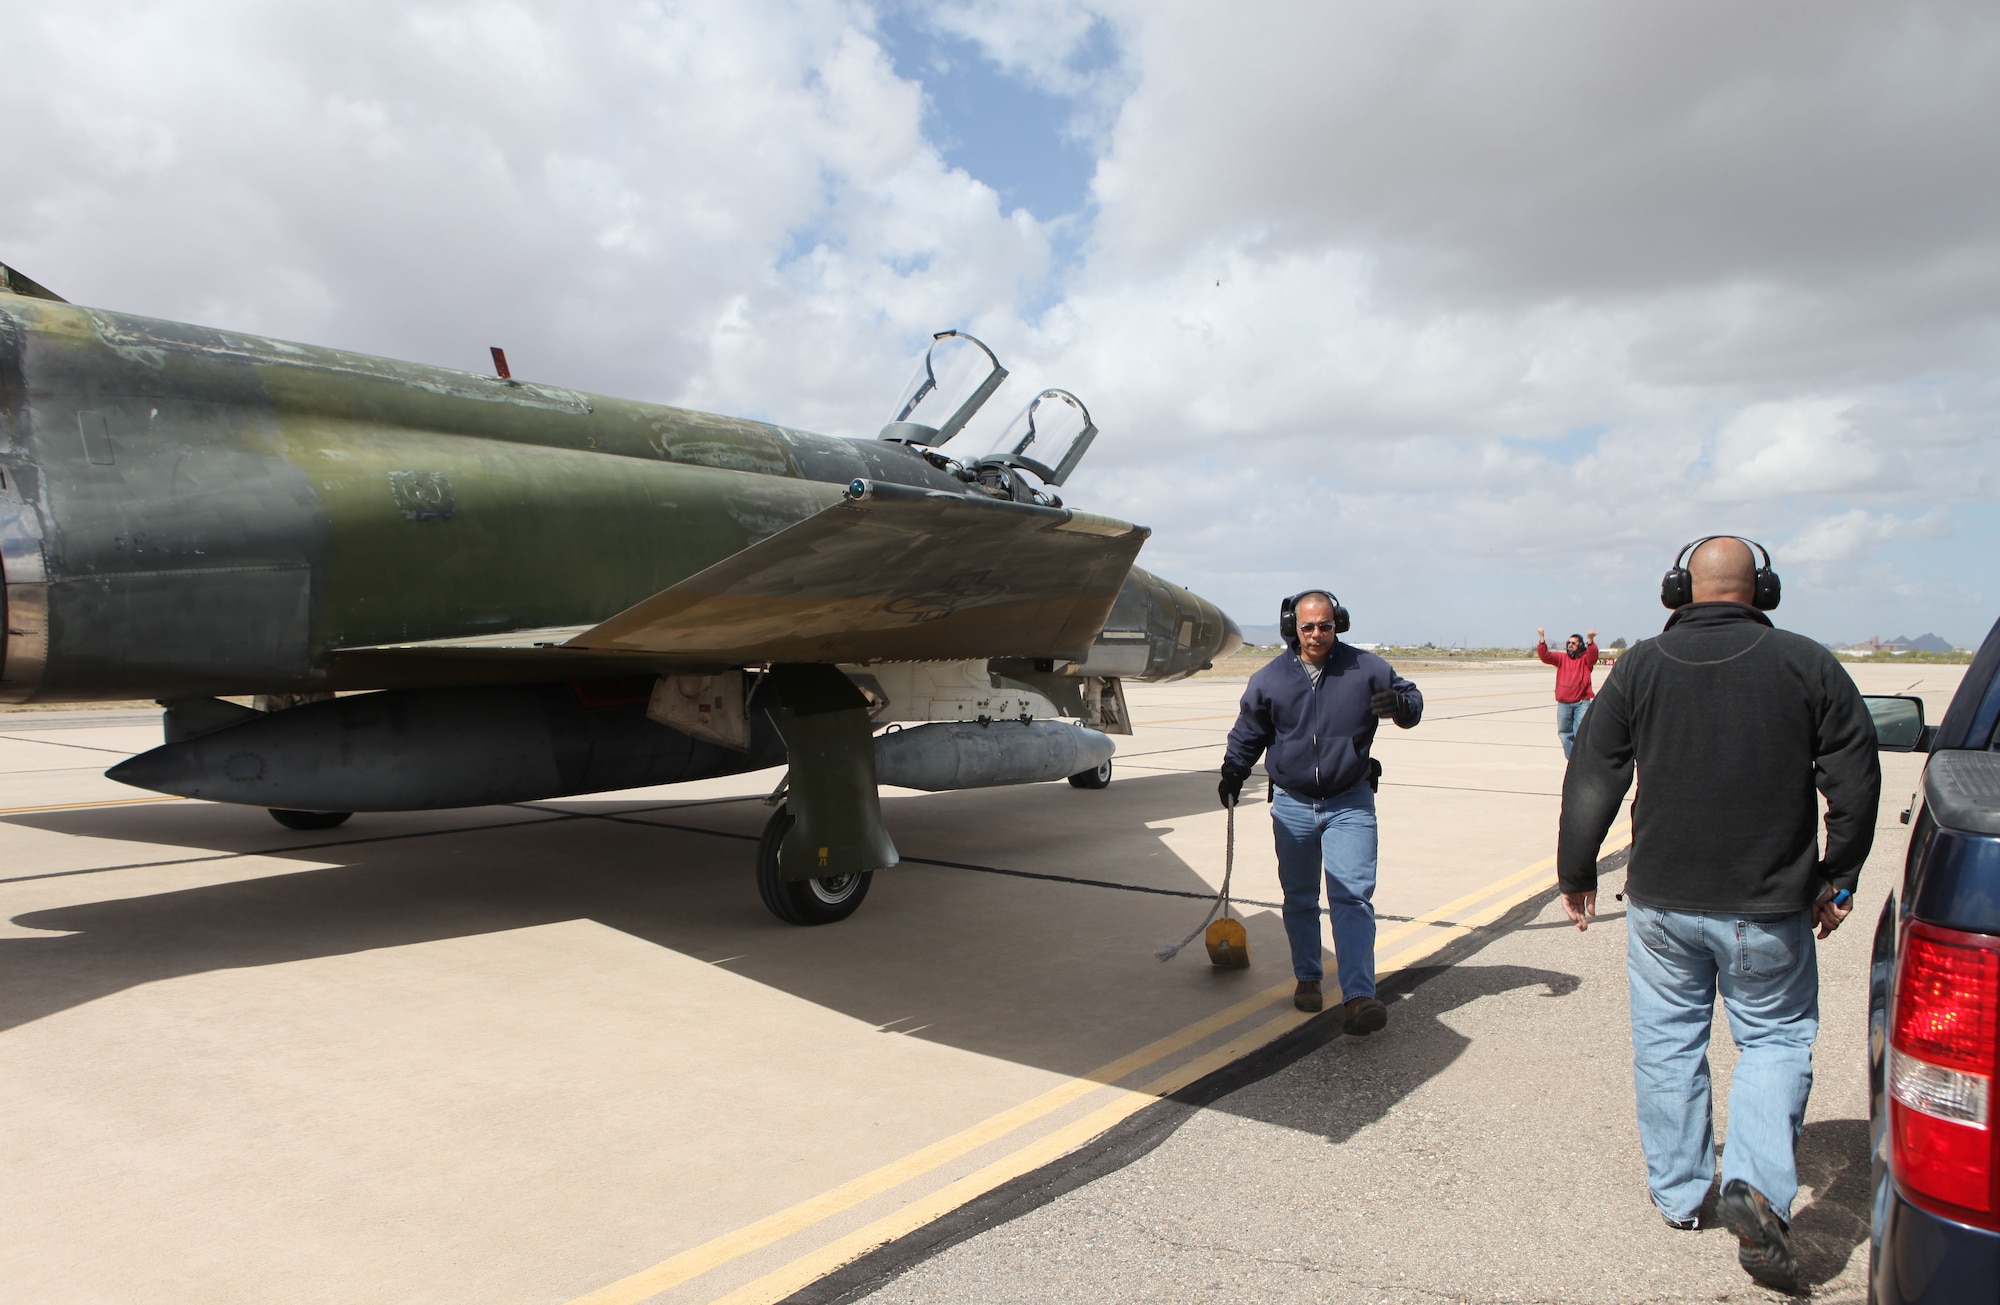 From left, Jose Antrobus, Eddie Caro and Stephen Merz, all assigned to the 576th Aerospace Maintenance and Regeneration Squadron, 309th Aerospace Mainteance and Regeneration Group, perform a last inspection on an F-4 Phantom, tail number 68-0599, at Davis-Monthan Air Force Base, Ariz., April 17, 2013. Caro, crew chief of the aircraft, and the other maintenance professionals put in thousands of hours to return the aircraft to flying status after more than 20 years. (Courtesy photo/Released)